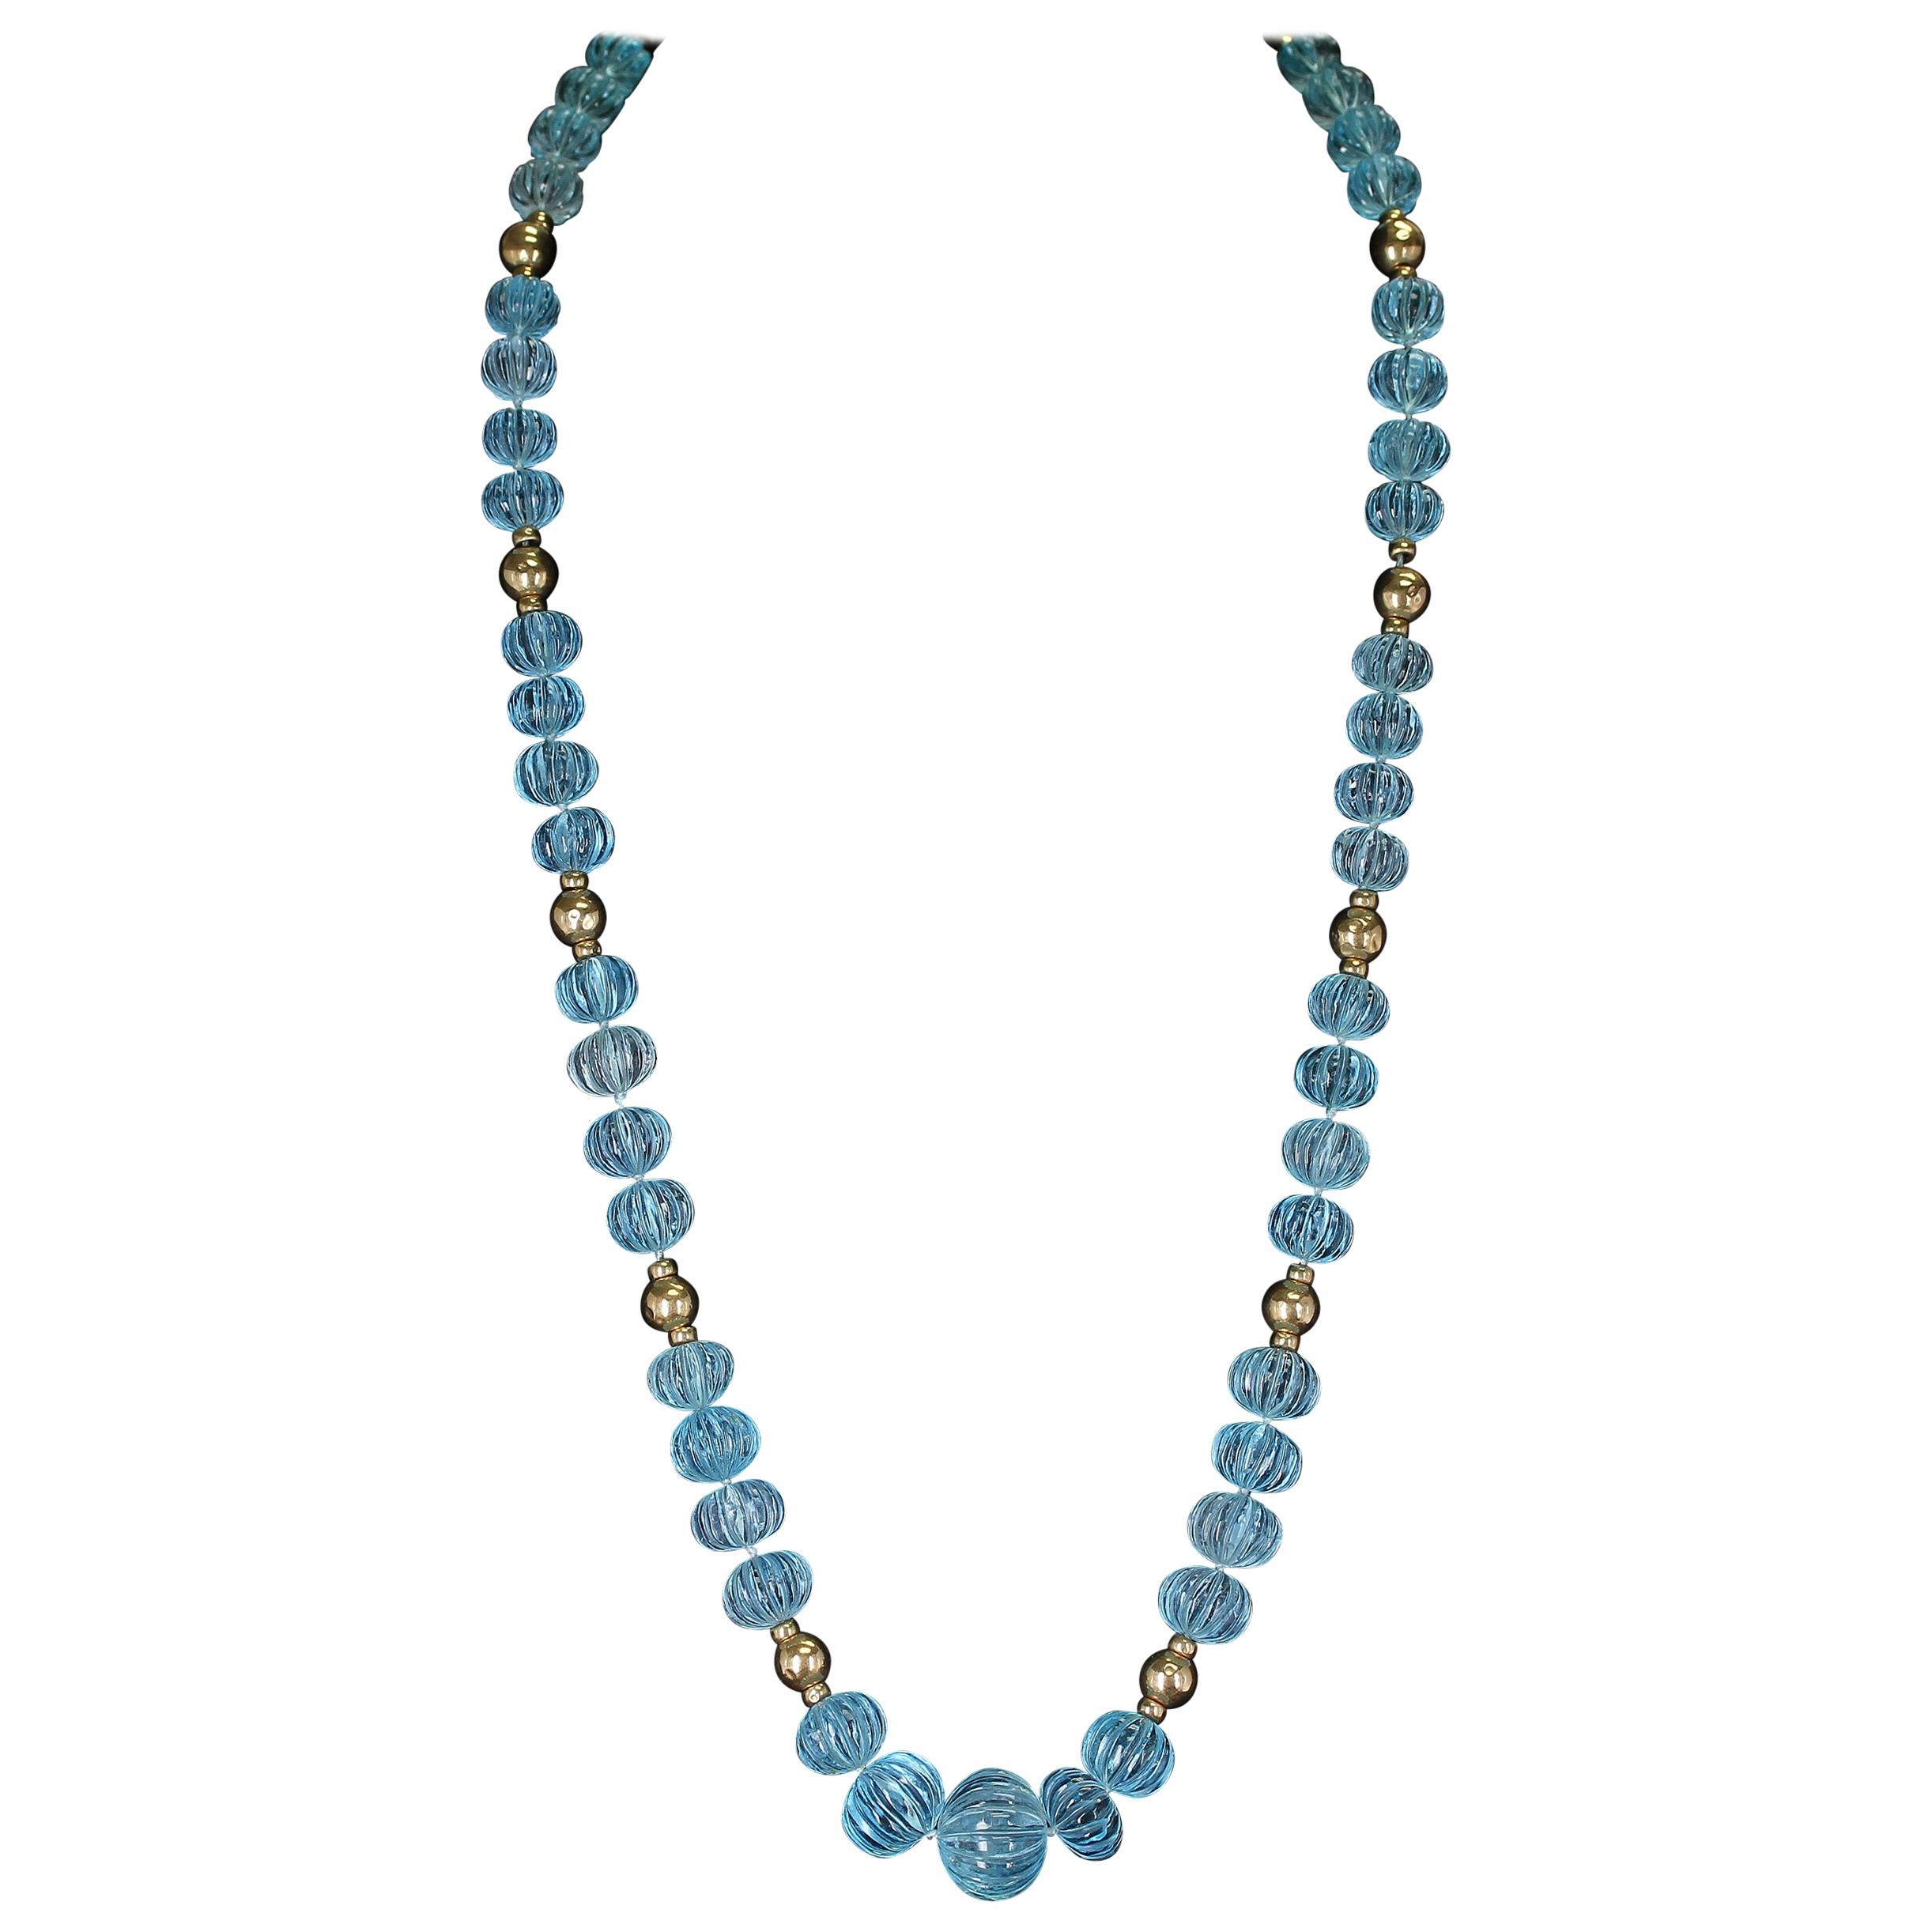 Carved Blue Topaz Necklace with Gold Beads In Good Condition For Sale In New York, NY